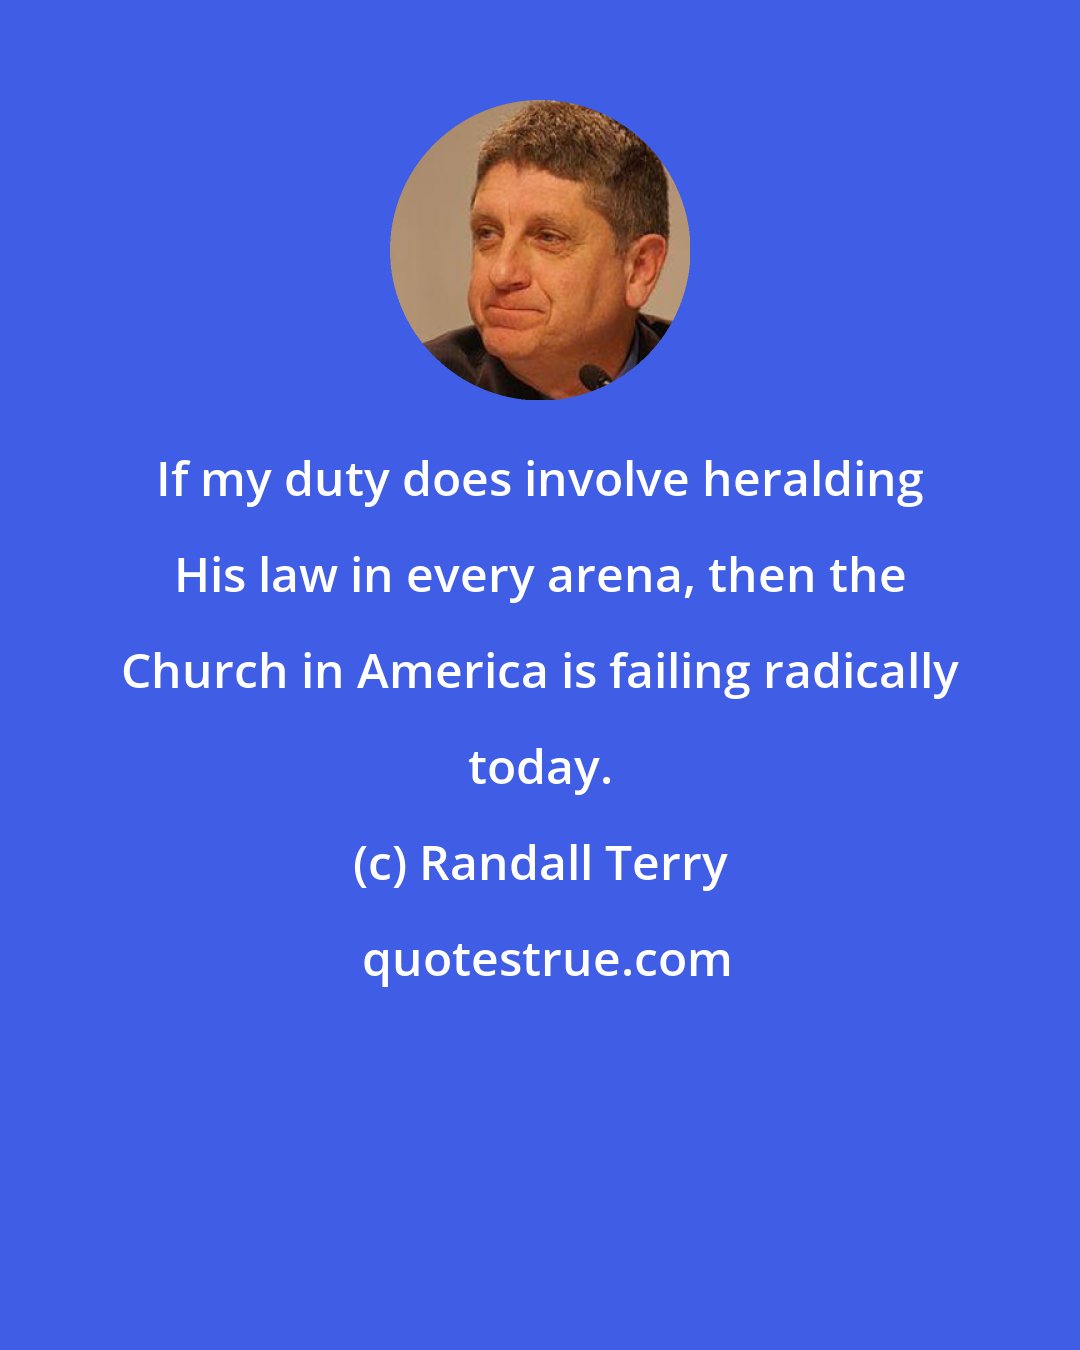 Randall Terry: If my duty does involve heralding His law in every arena, then the Church in America is failing radically today.